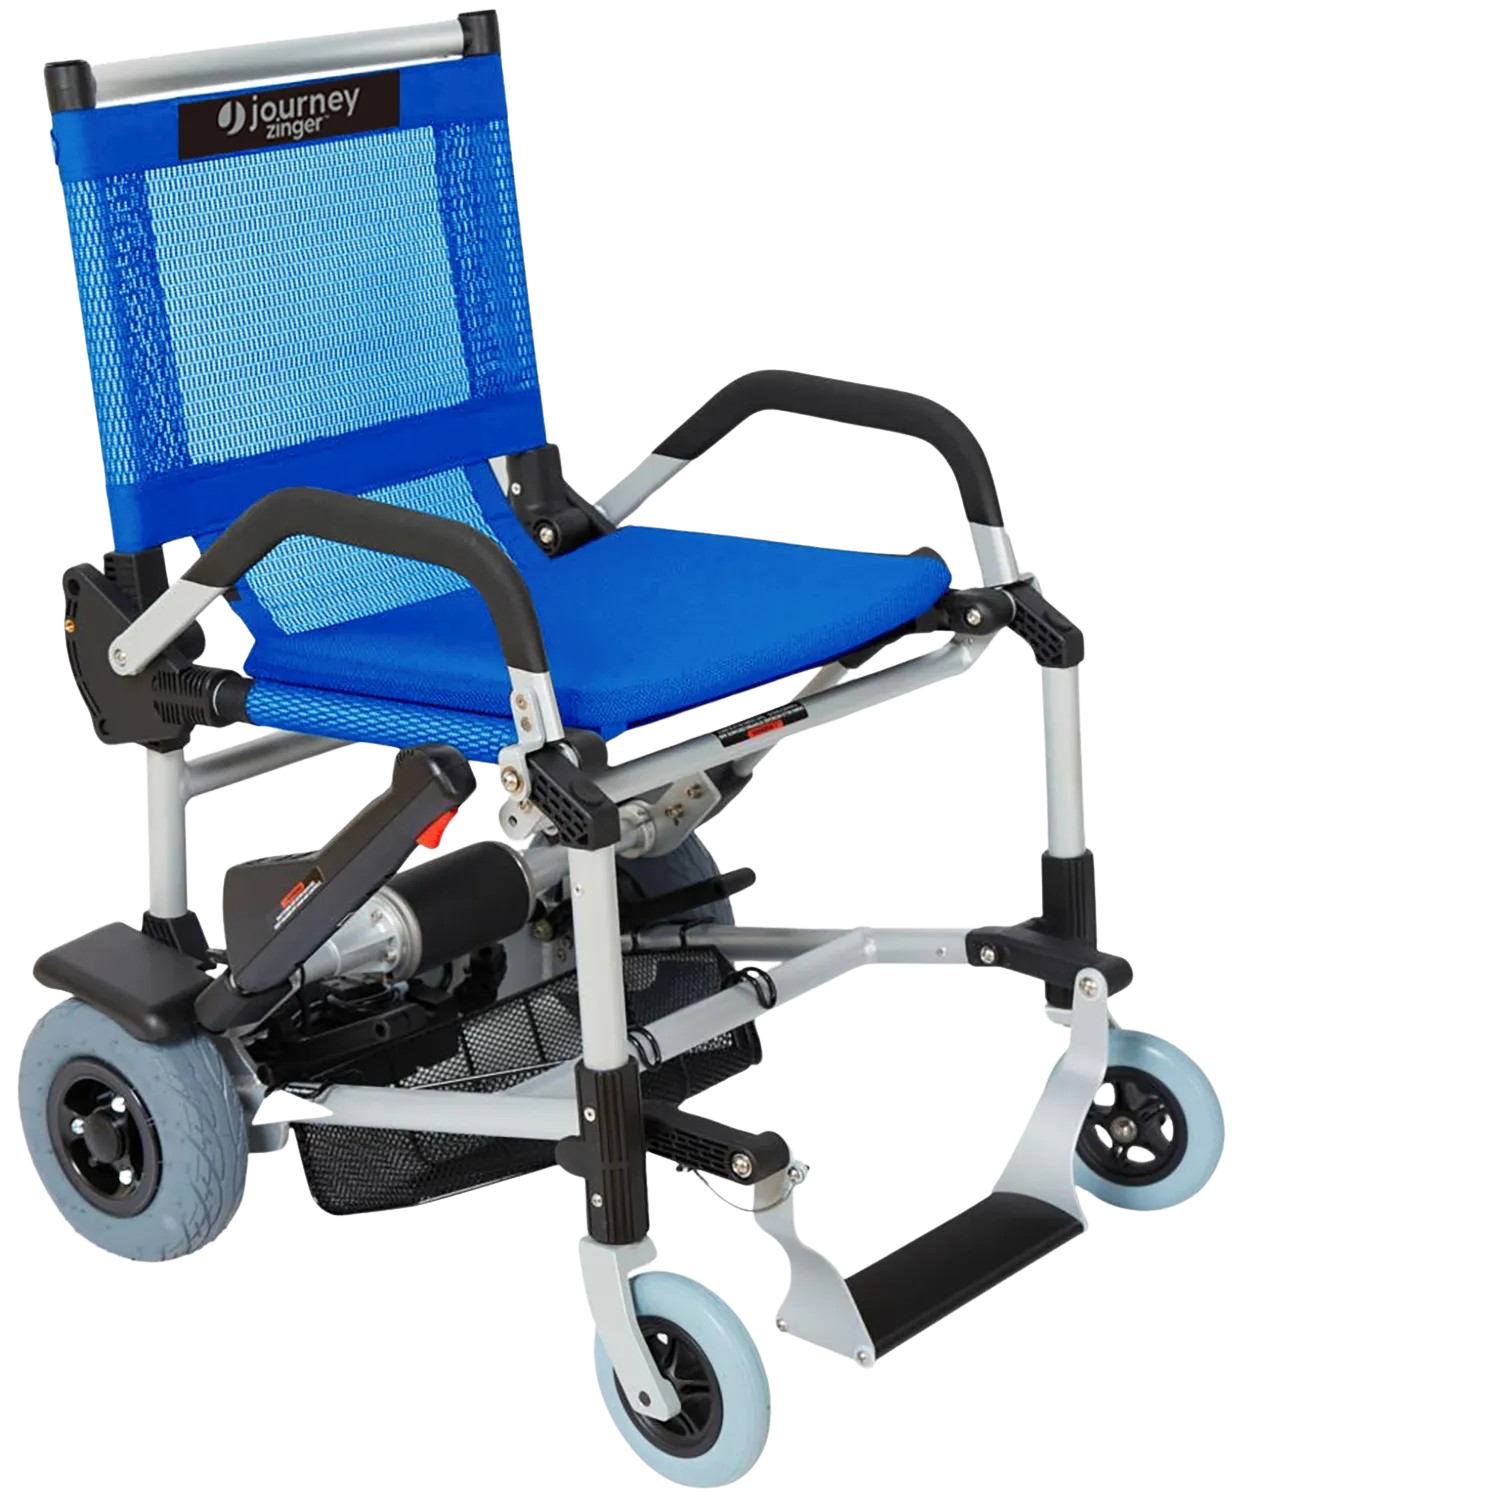 Journey, Journey Zinger Folding Power Chair 36V 7Ah 250W 6 MPH 8 Mile Range Two-Handed Control 08300 New